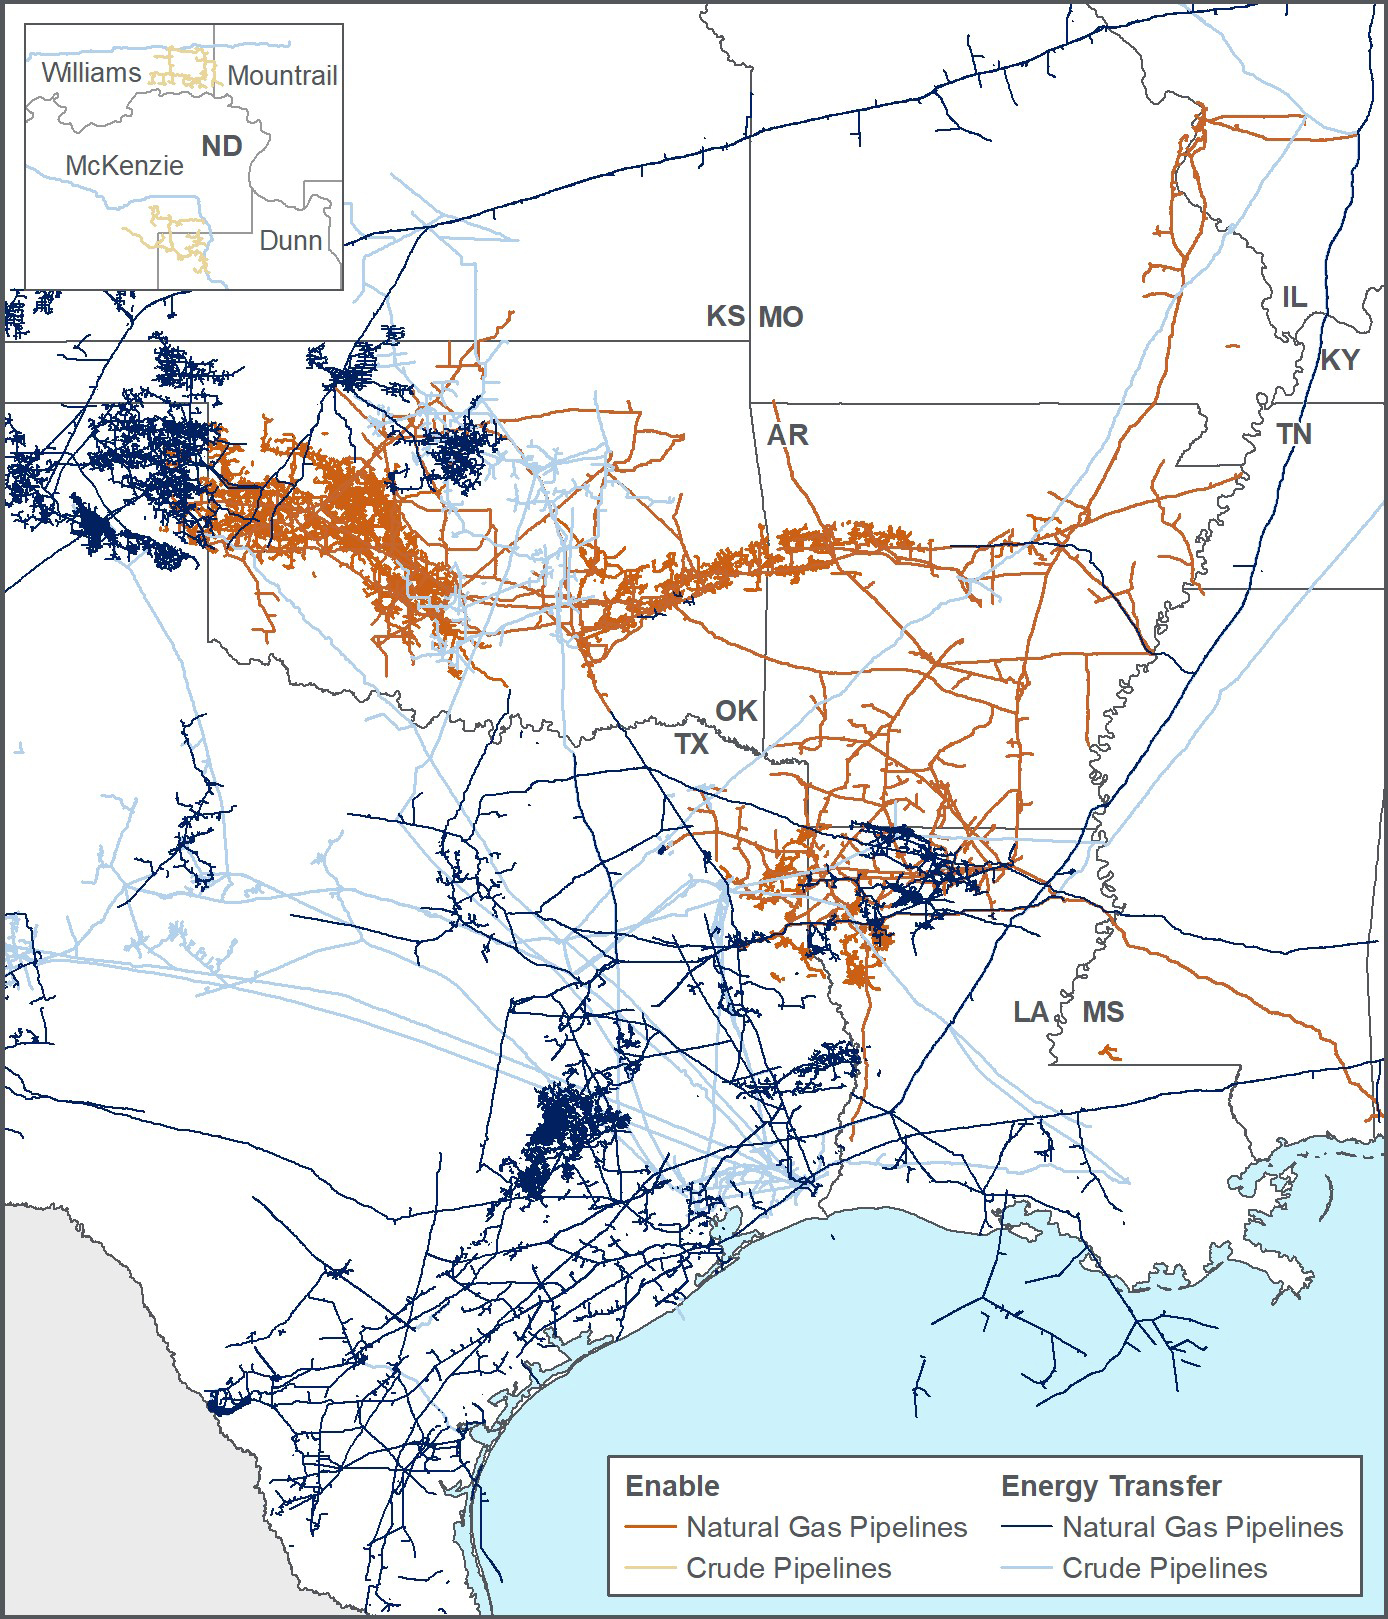 Energy Transfer, Enable Midstream Partners Combined Footprint Asset Map (Source: Business Wire)